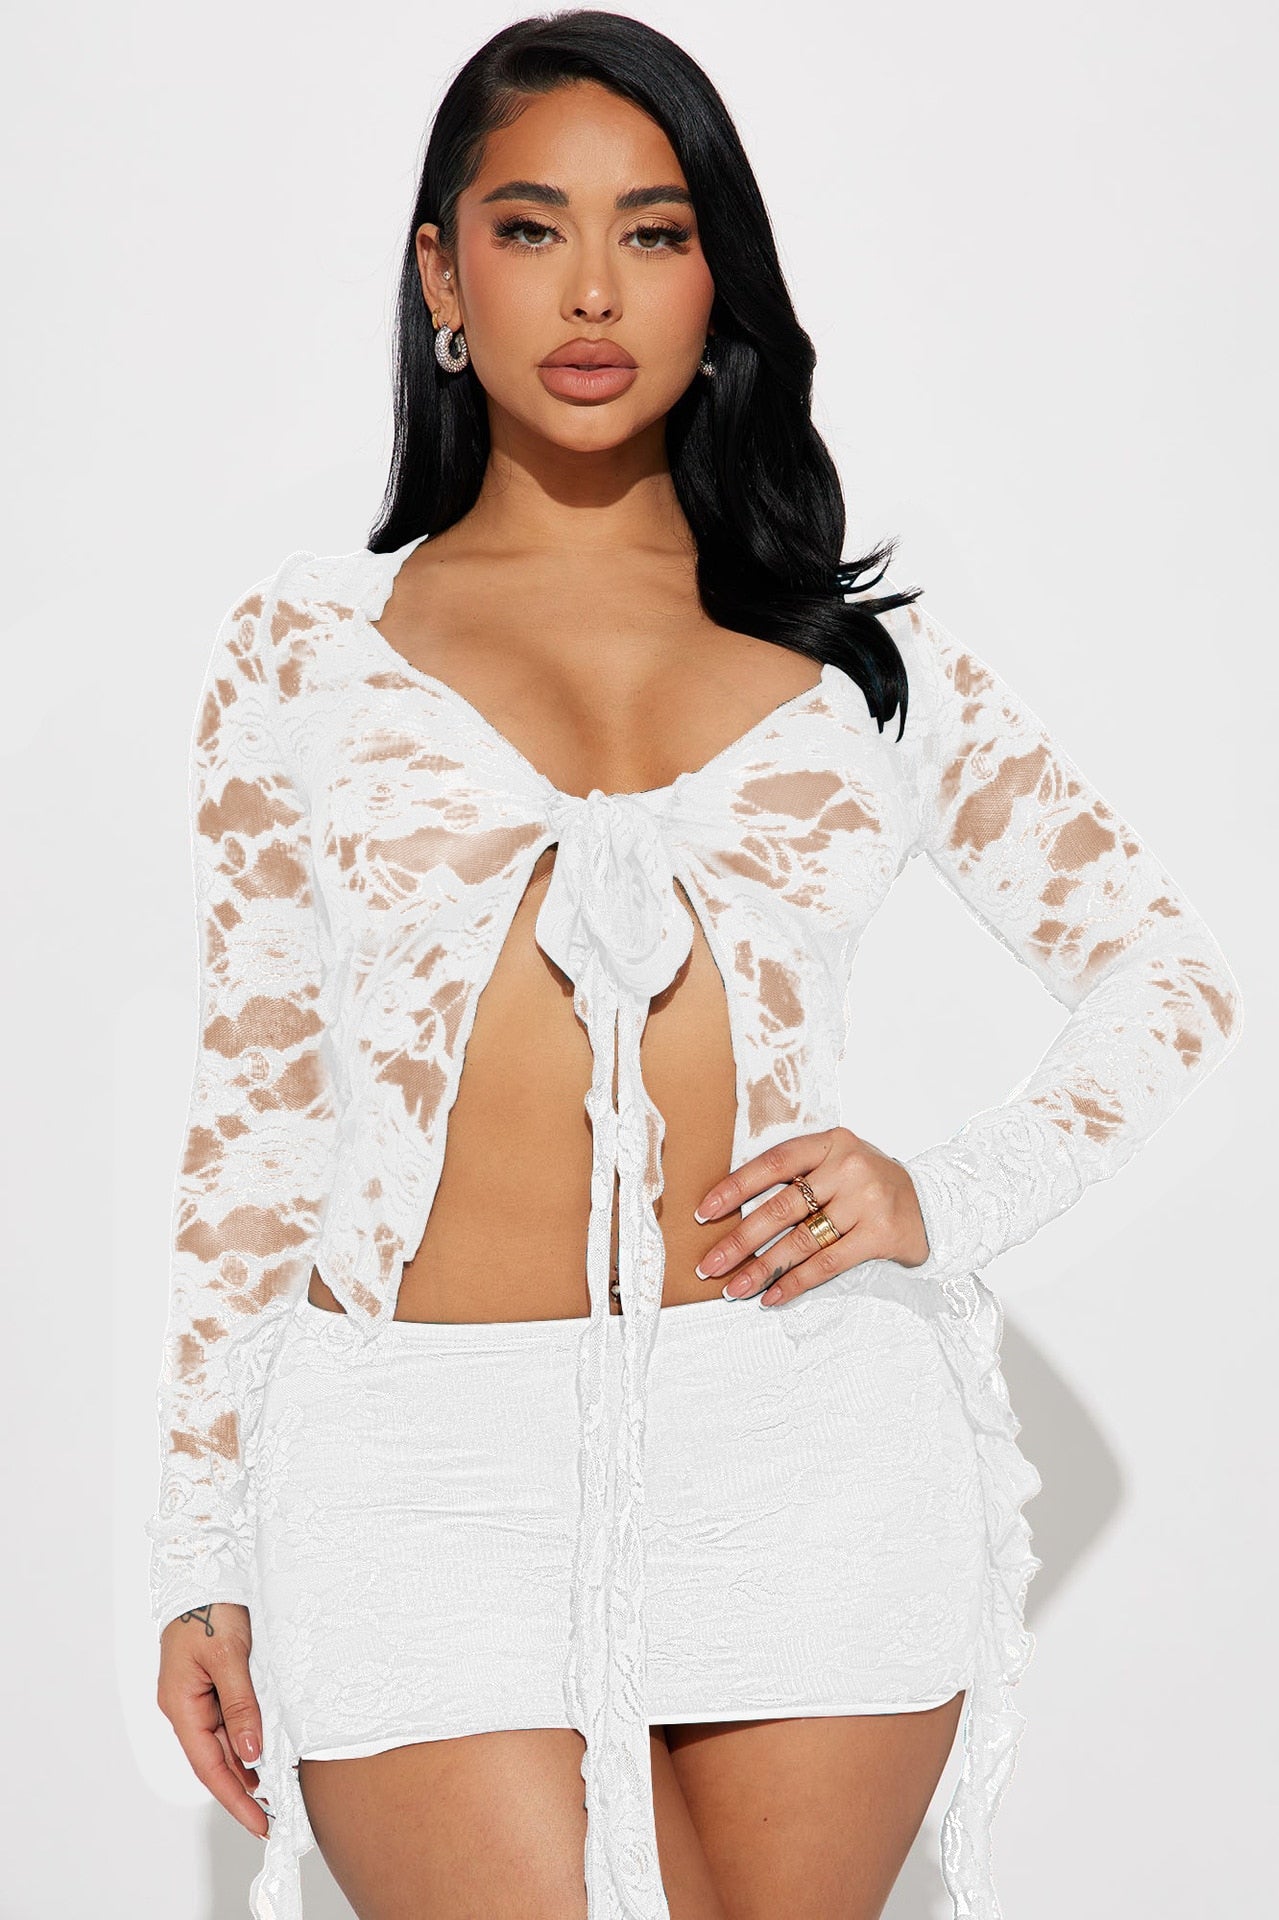 Sexy Lace V-Neck Long Sleeve Tied Top & Mini Skirt Set